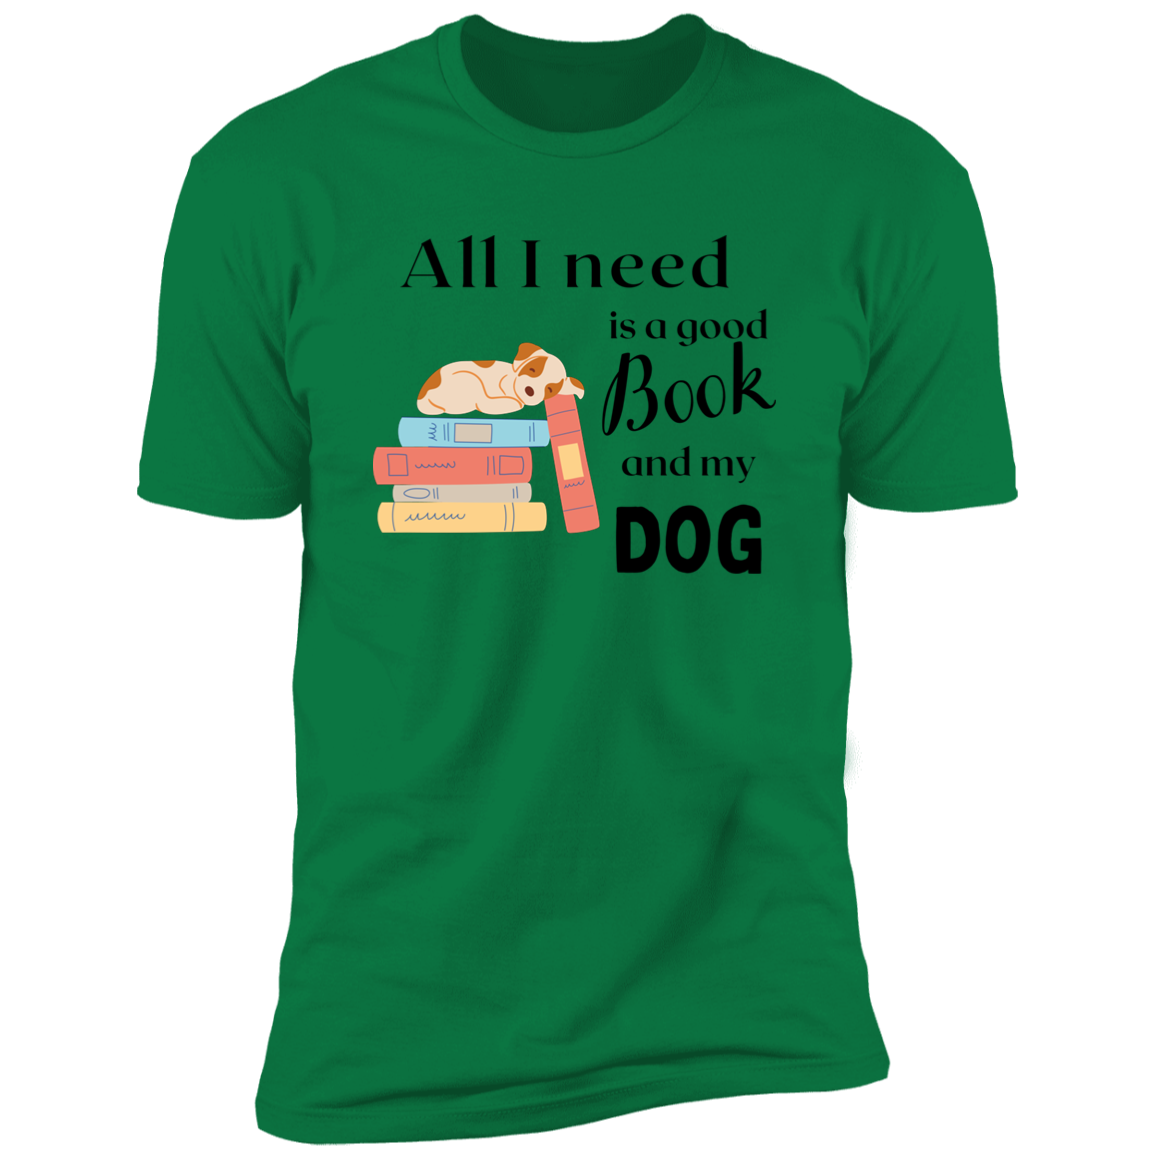 All I Need is a Good Book and My Dog, dog t-shirt for humans, in kelly green